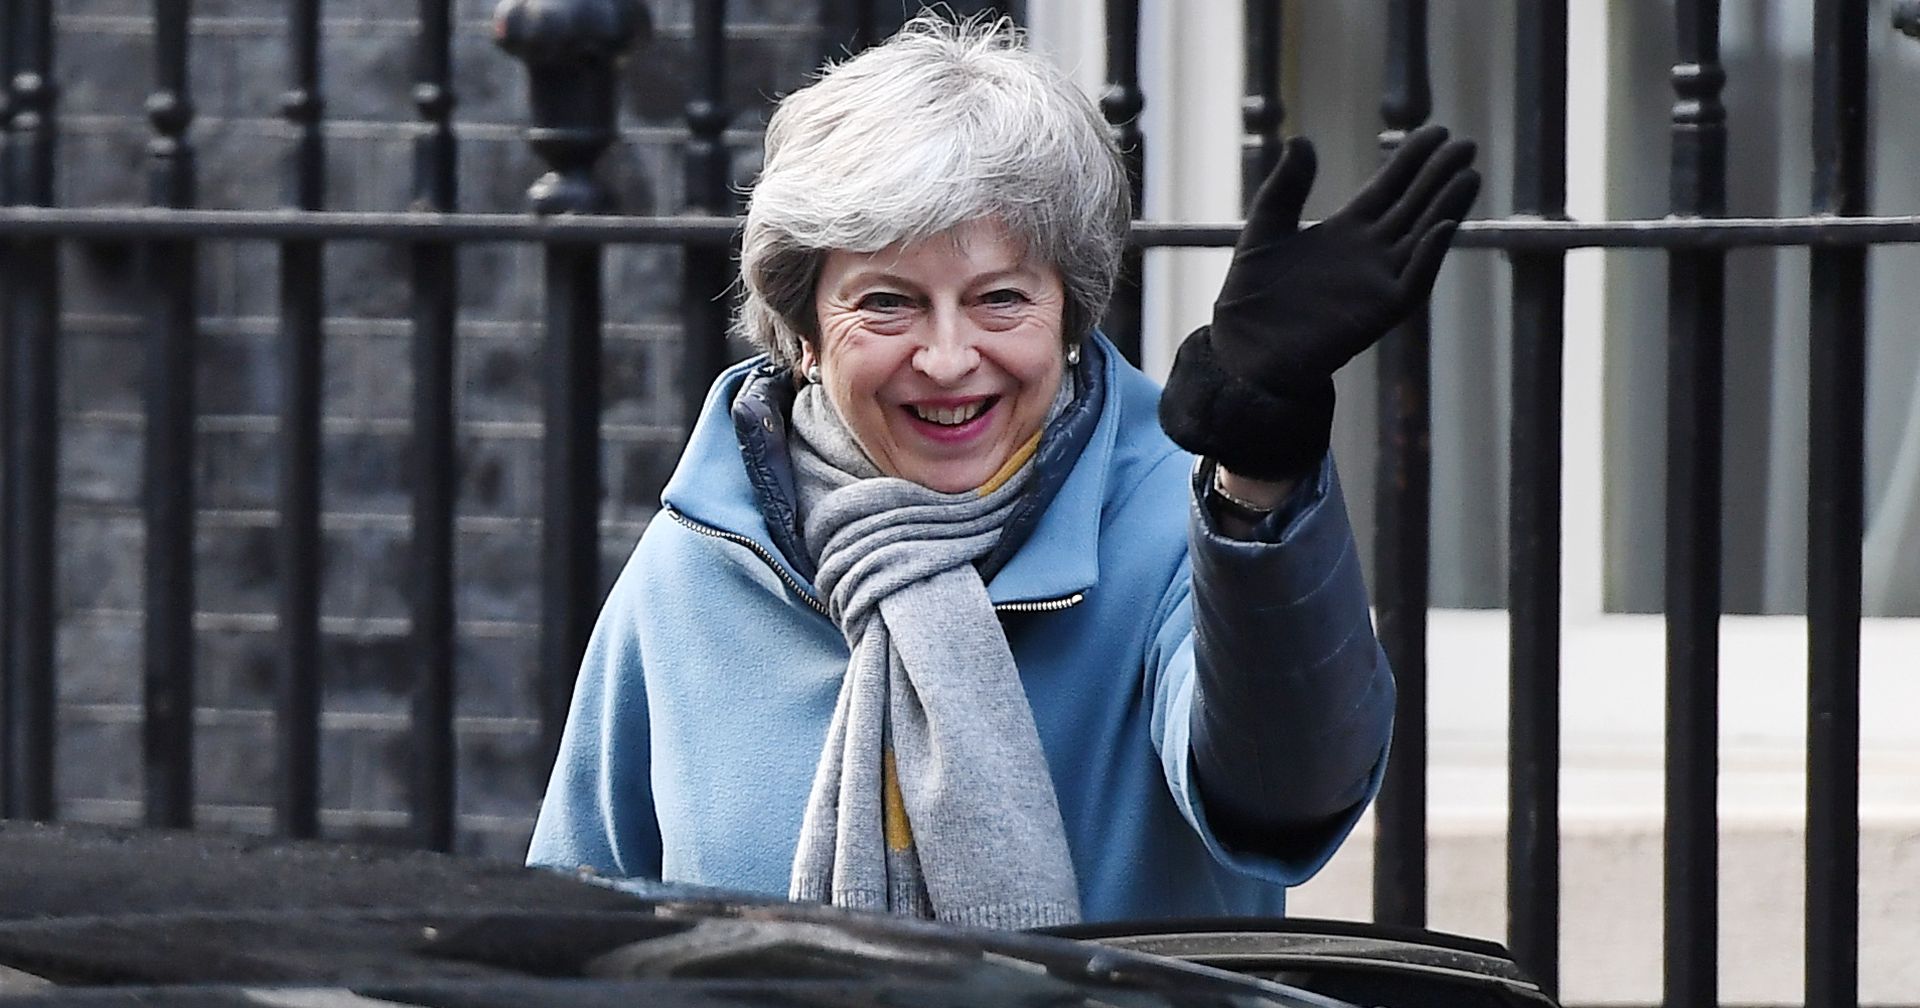 epa07436865 British Prime Minister, Theresa May leaves Downing Street in London, Britain, 14 March 2019. Members of Parliament are set to vote on whether to ask European Union for permission to delay Brexit later in the day after they rejected no-deal Brexit on 13 March.  EPA/ANDY RAIN